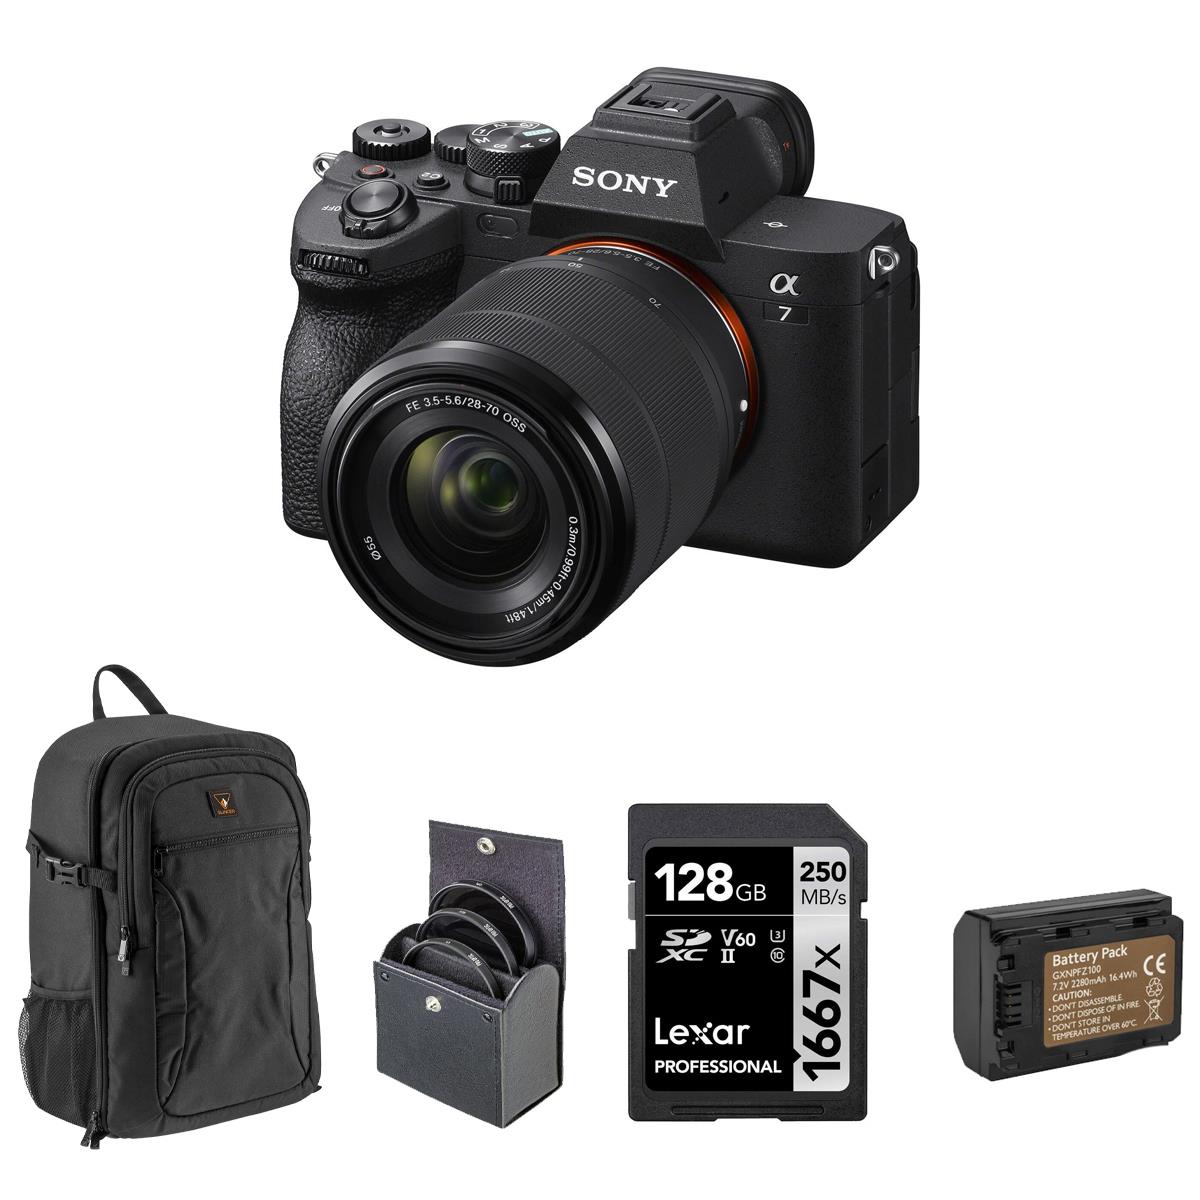 Image of Sony Alpha a7 IV Mirrorless Camera w/28-70mm f/3.5-5.6 Lens and Included Value